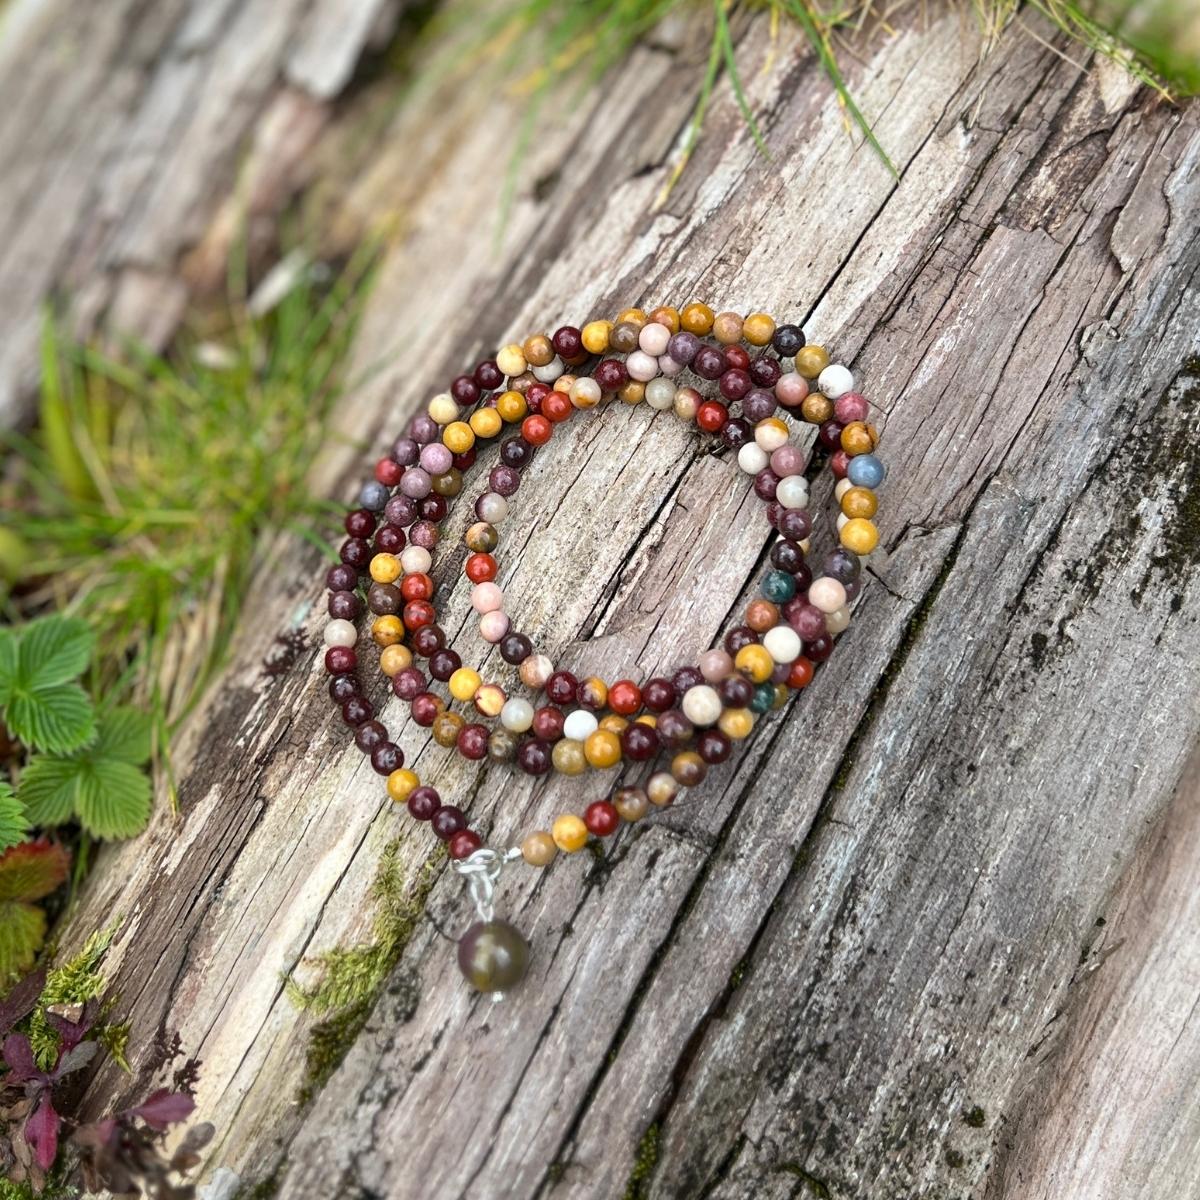 A bracelet made of Mookaite that enriches one's trust and love for Mother Earth., This Serene Symbiosis Mookaite Wrap Bracelet has the ability to ground one's mind, heart, and soul to the planet and connect with all sentient beings, creating a peaceful and harmonious coexistence.